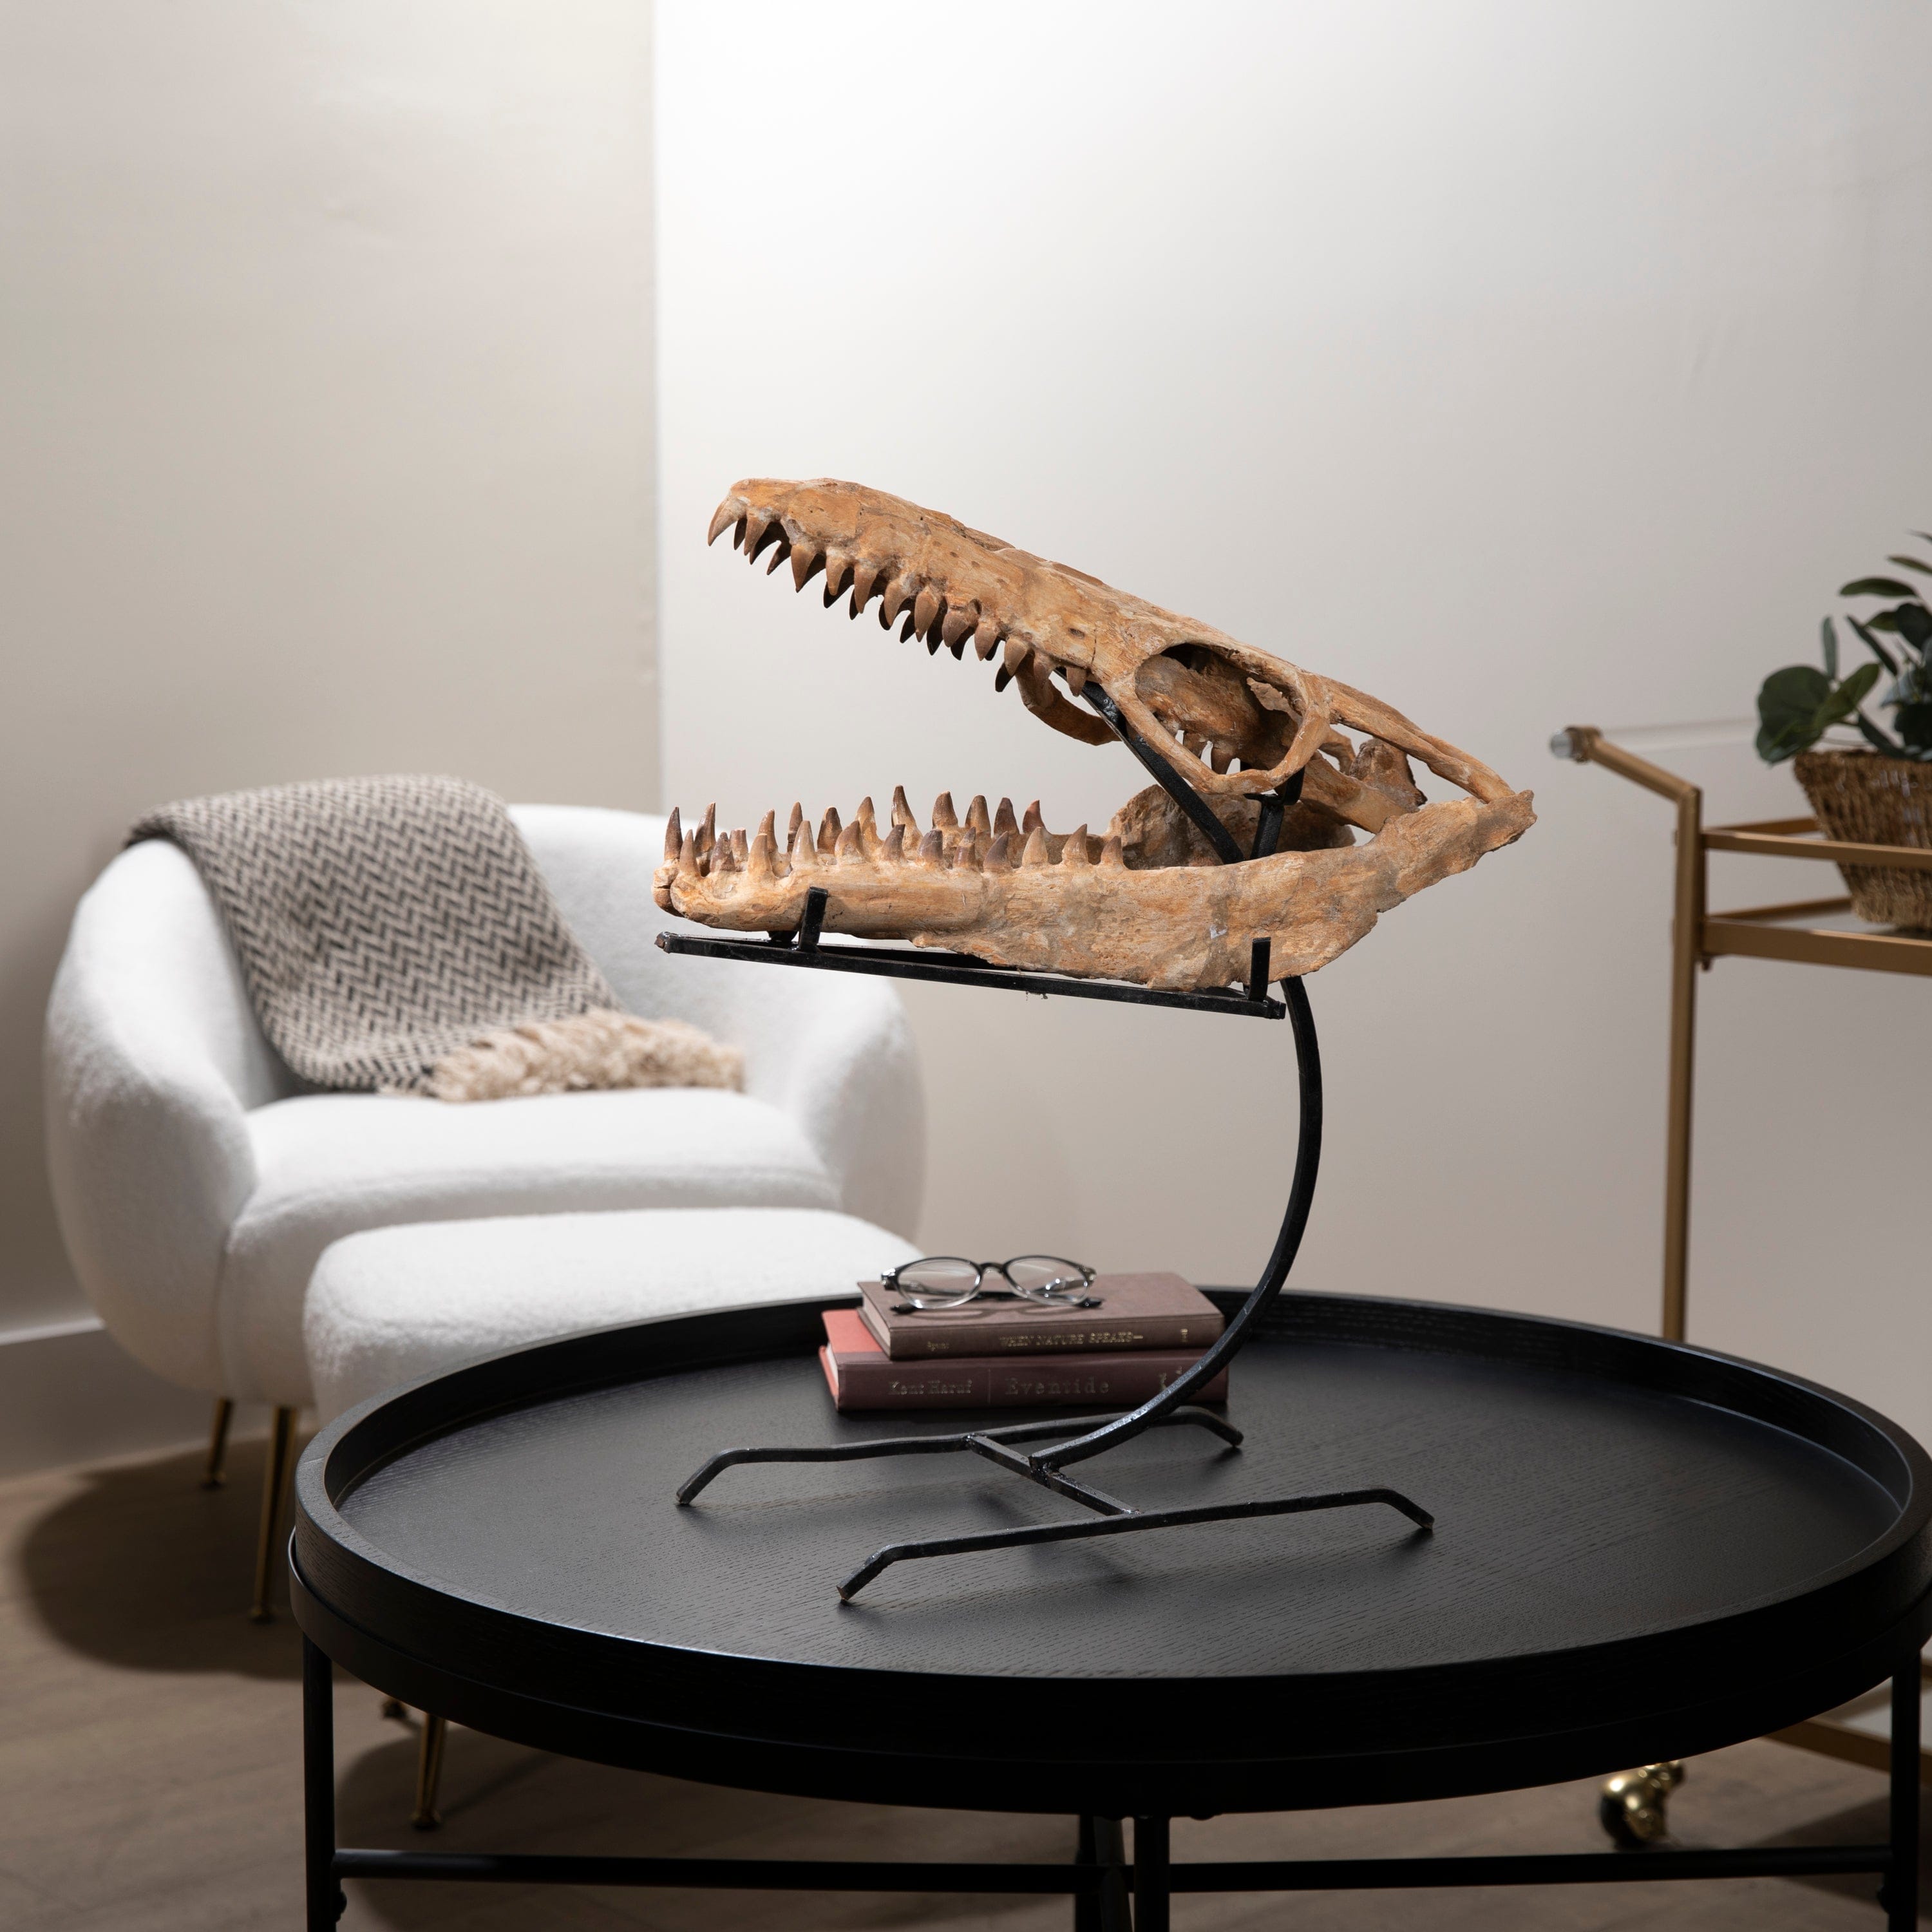 Kalifano Mosasaurus Fossils Moroccan Mosasaurus Jaw Fossil  on Custom Stand - 22" MOST32000.002